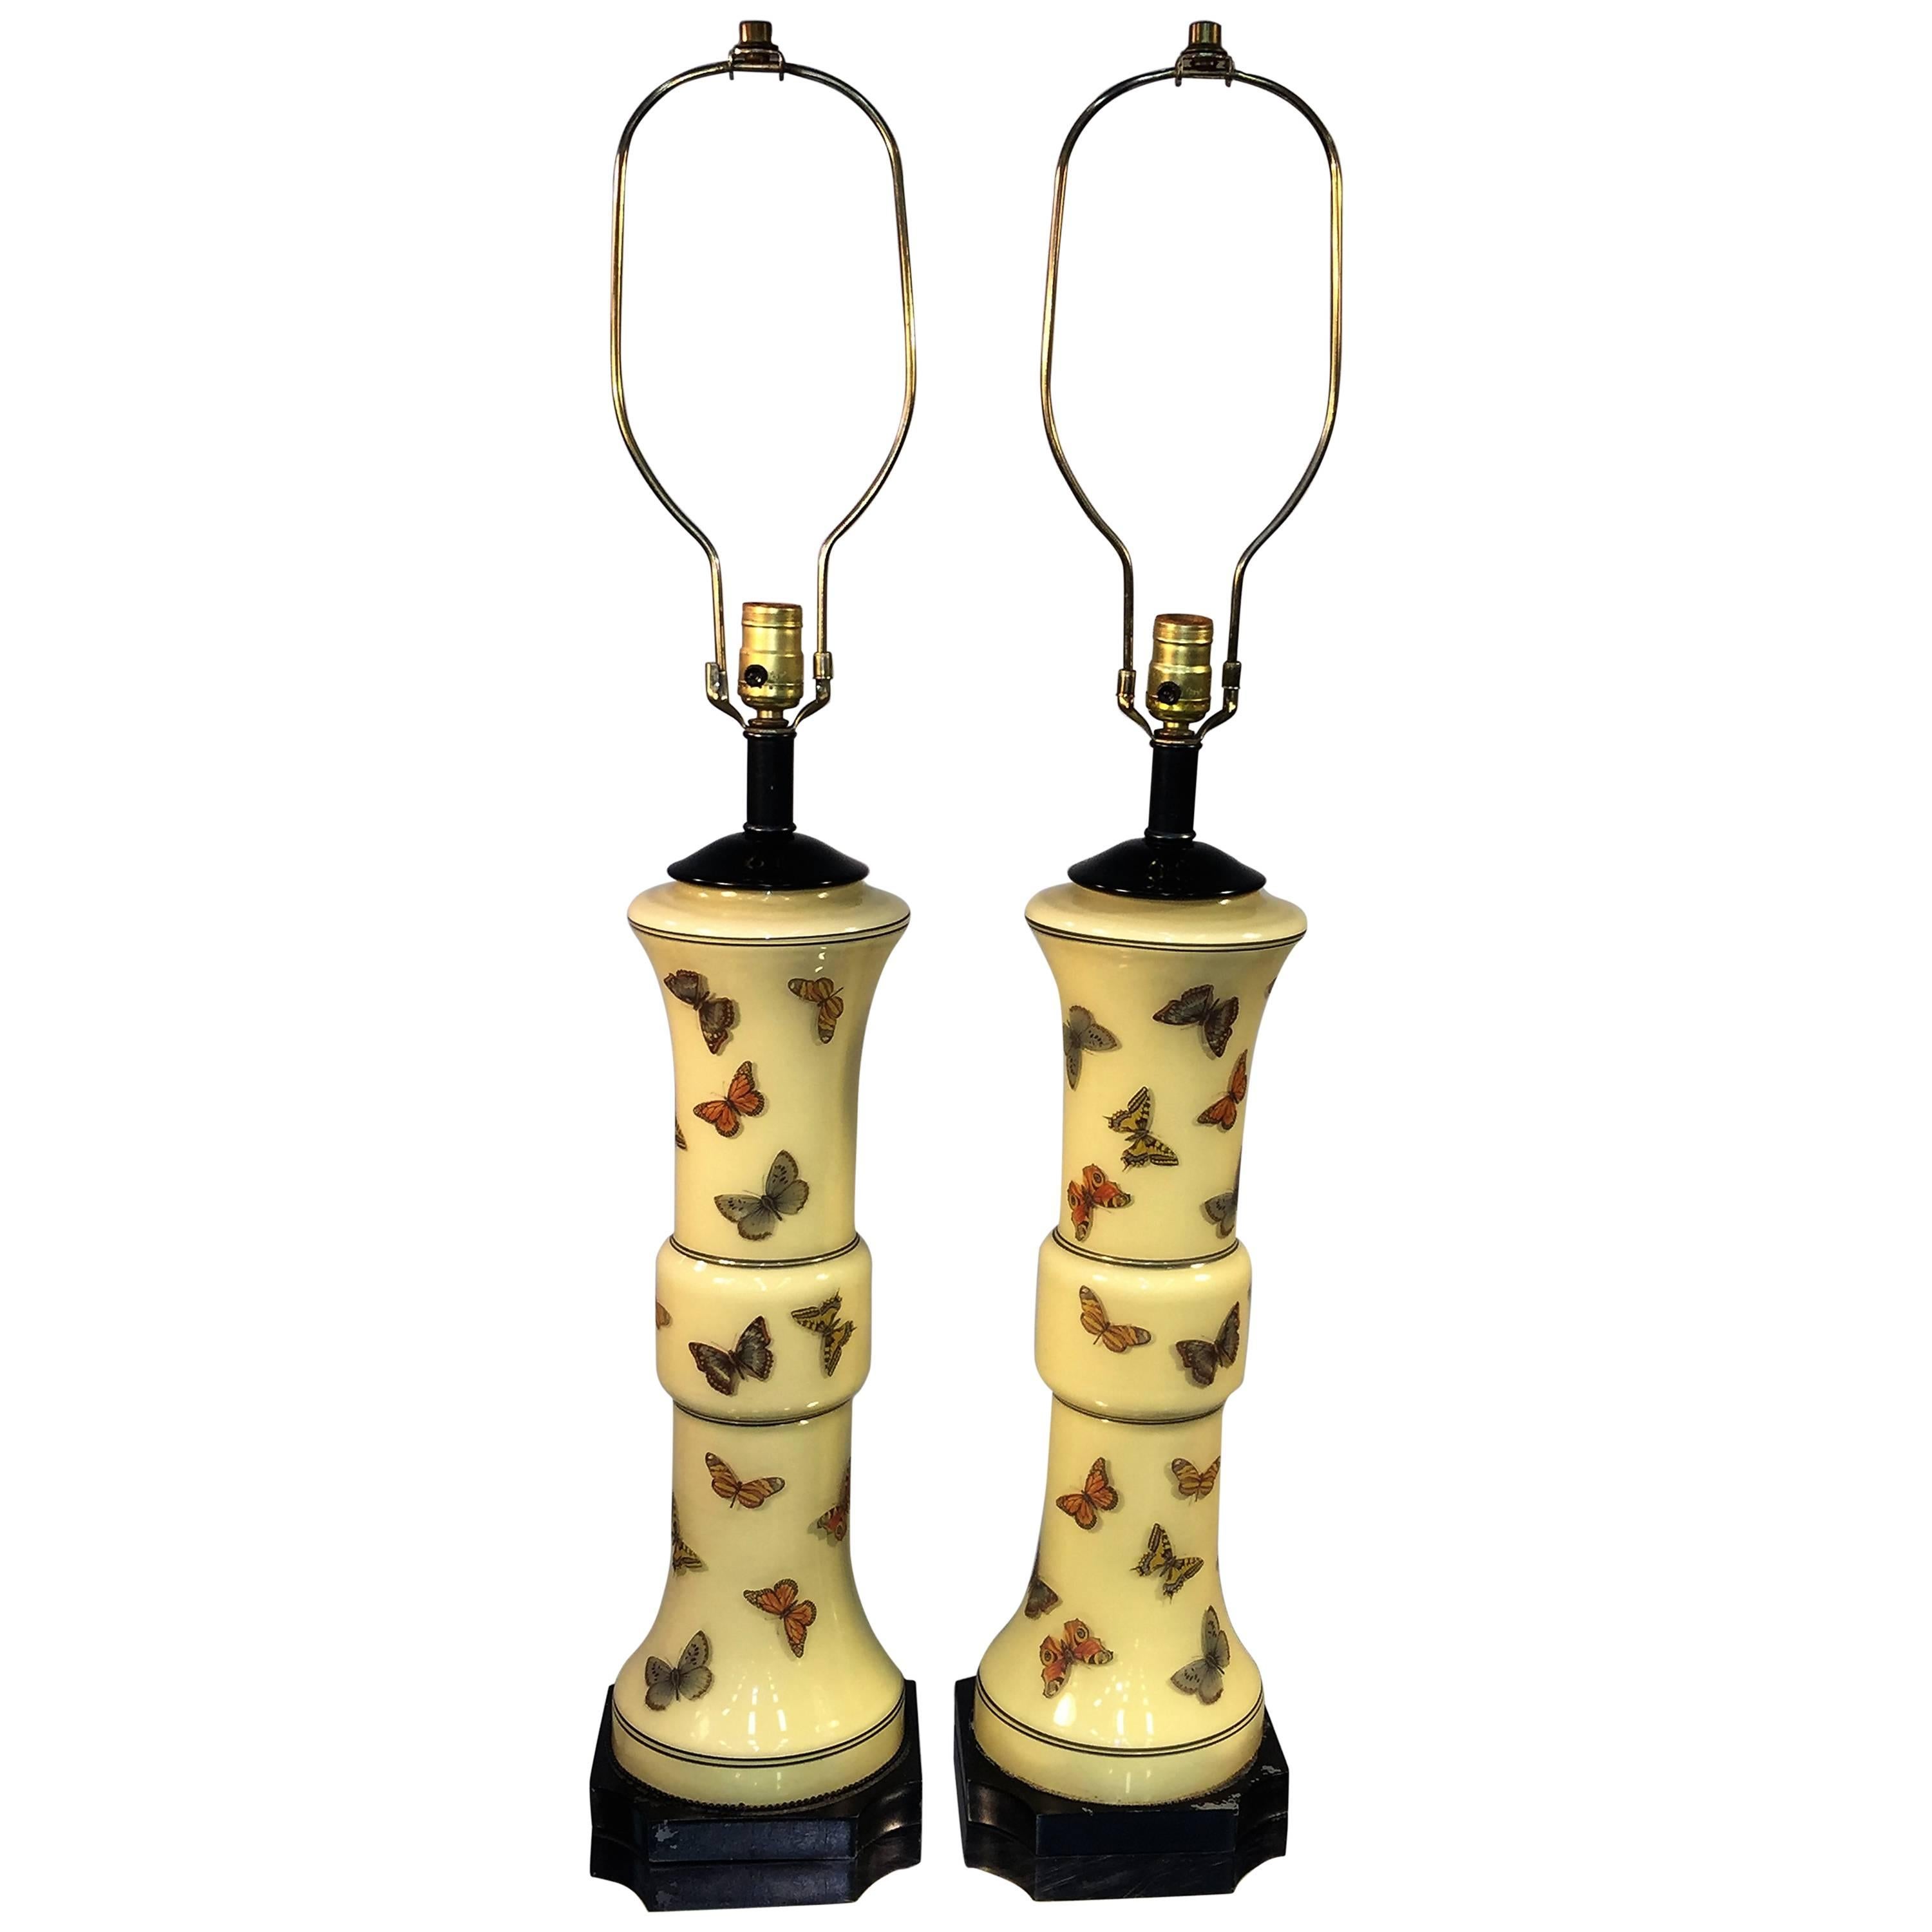 Marvelous Pair of Fornasetti Style Enameled Glass Butterfly Lamps For Sale